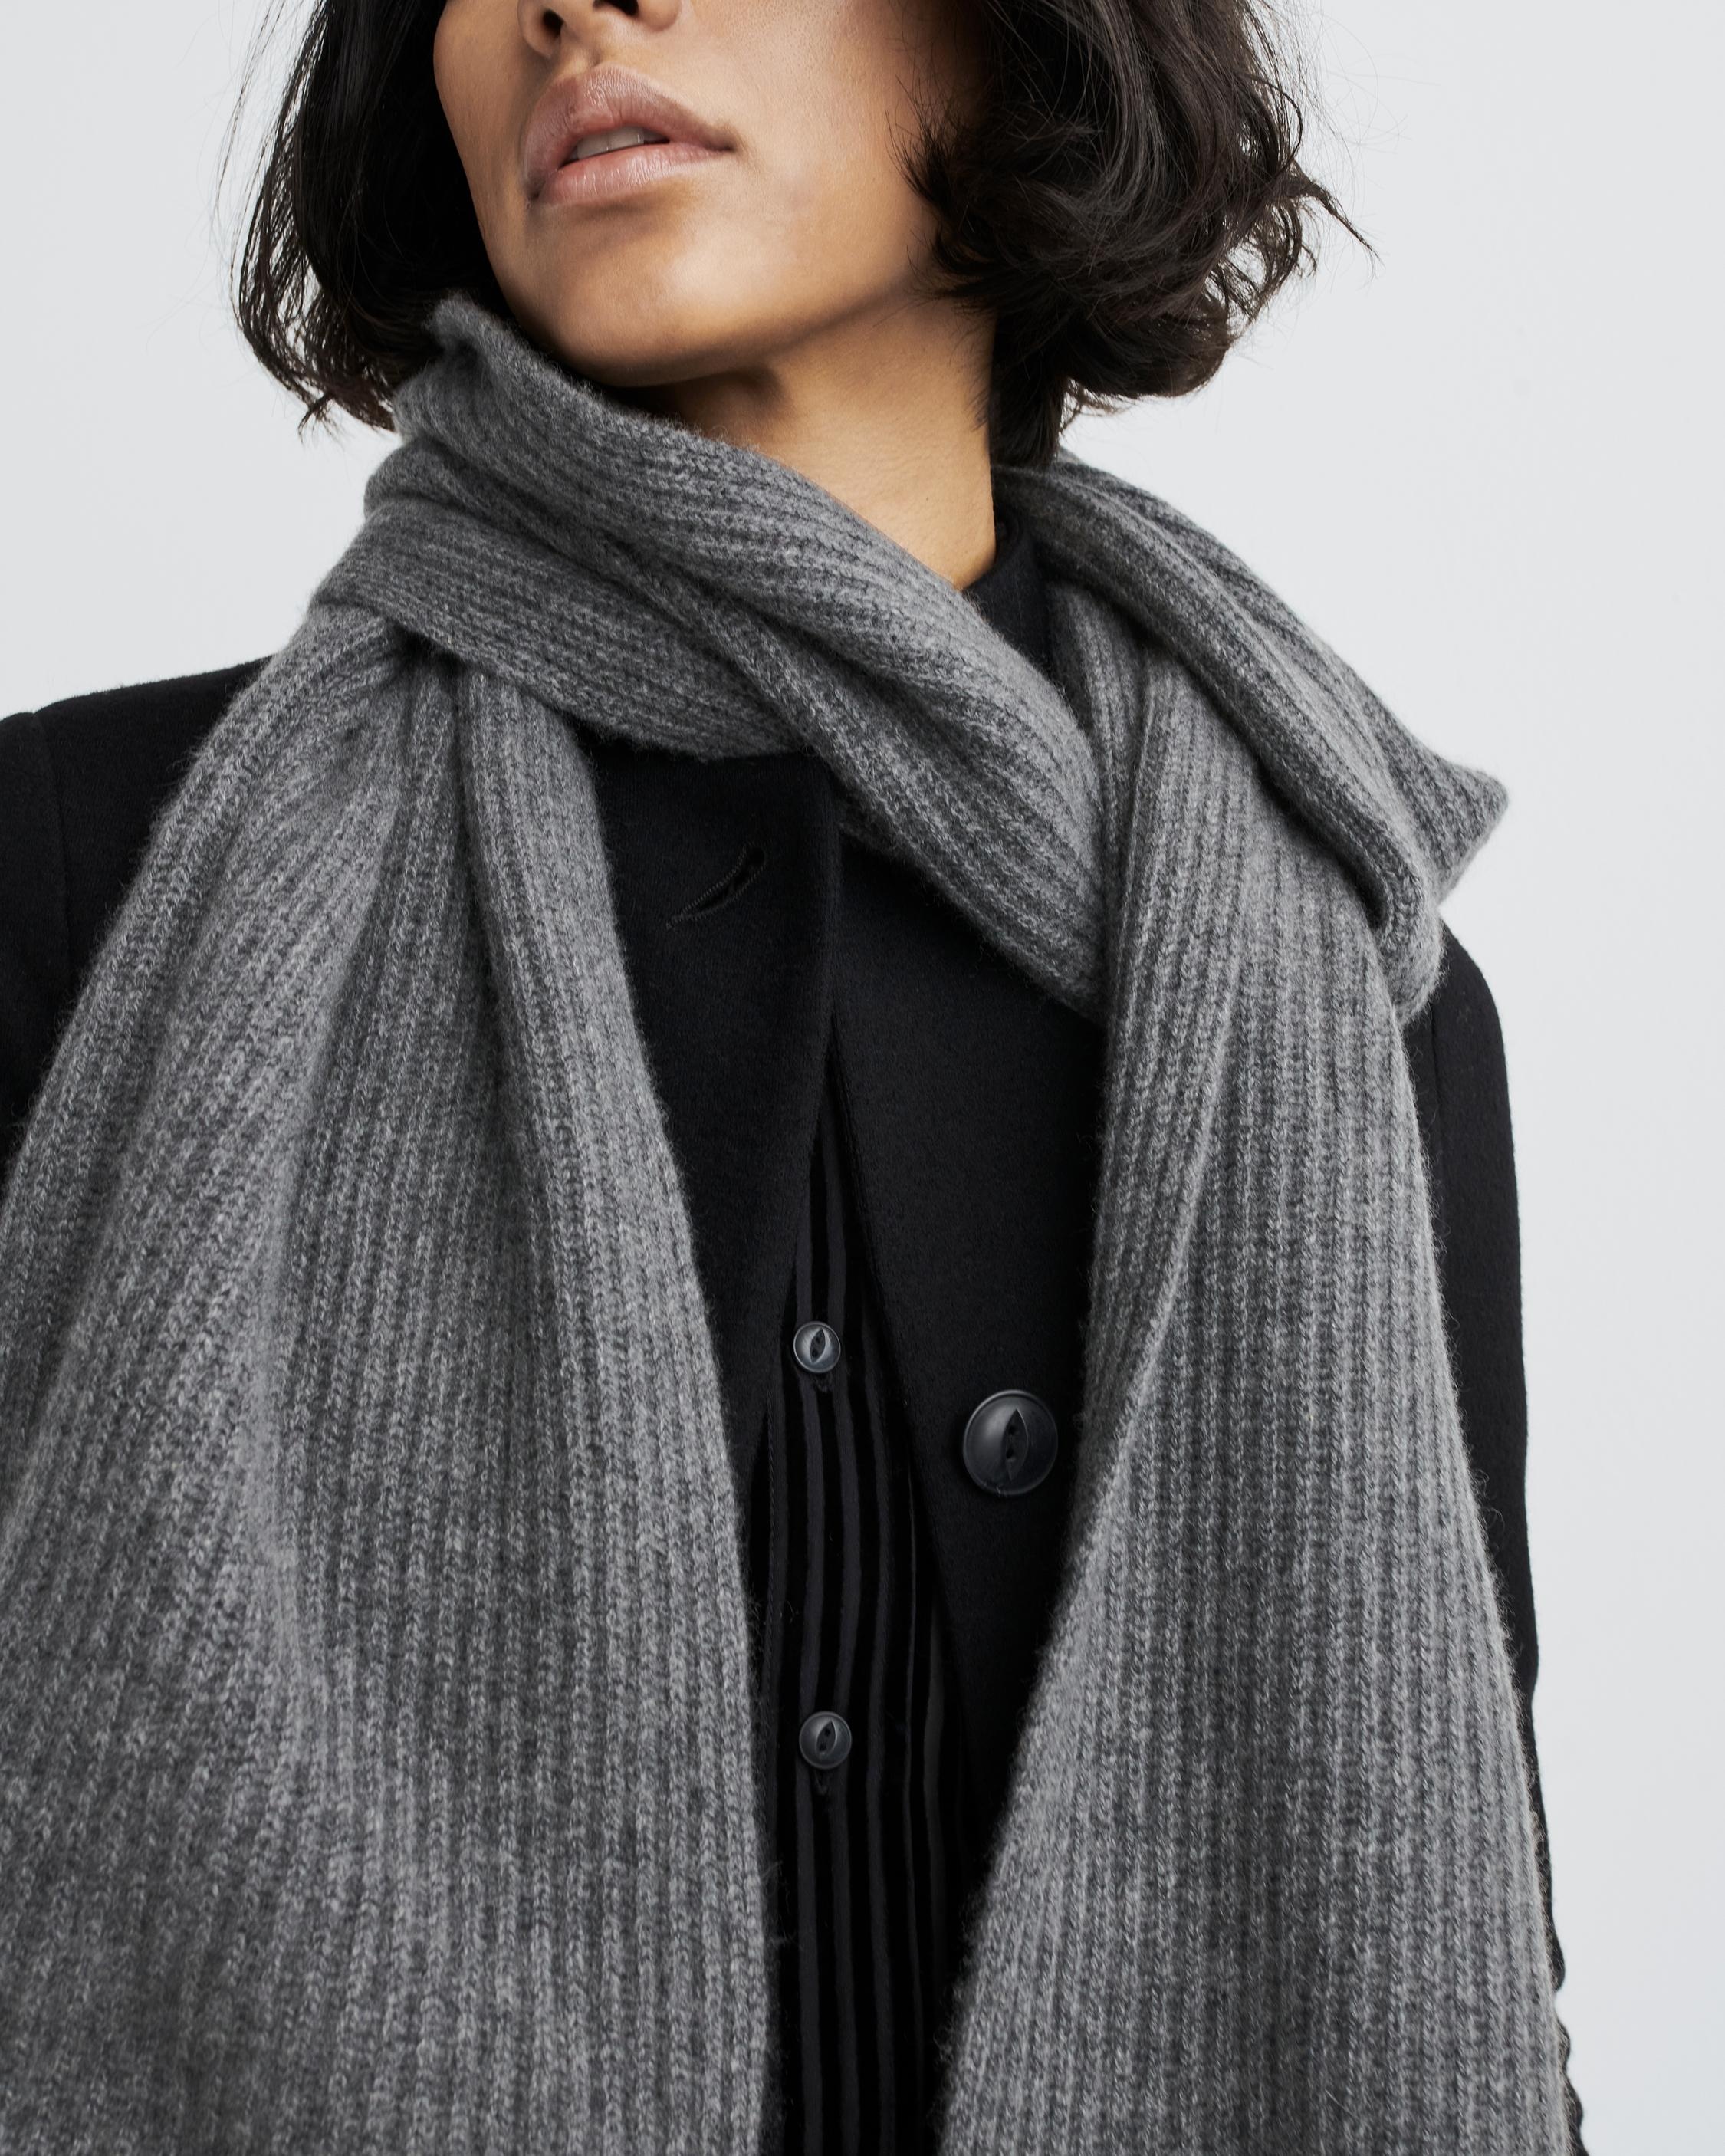 Ace Cashmere Scarf
Midweight Scarf - 2